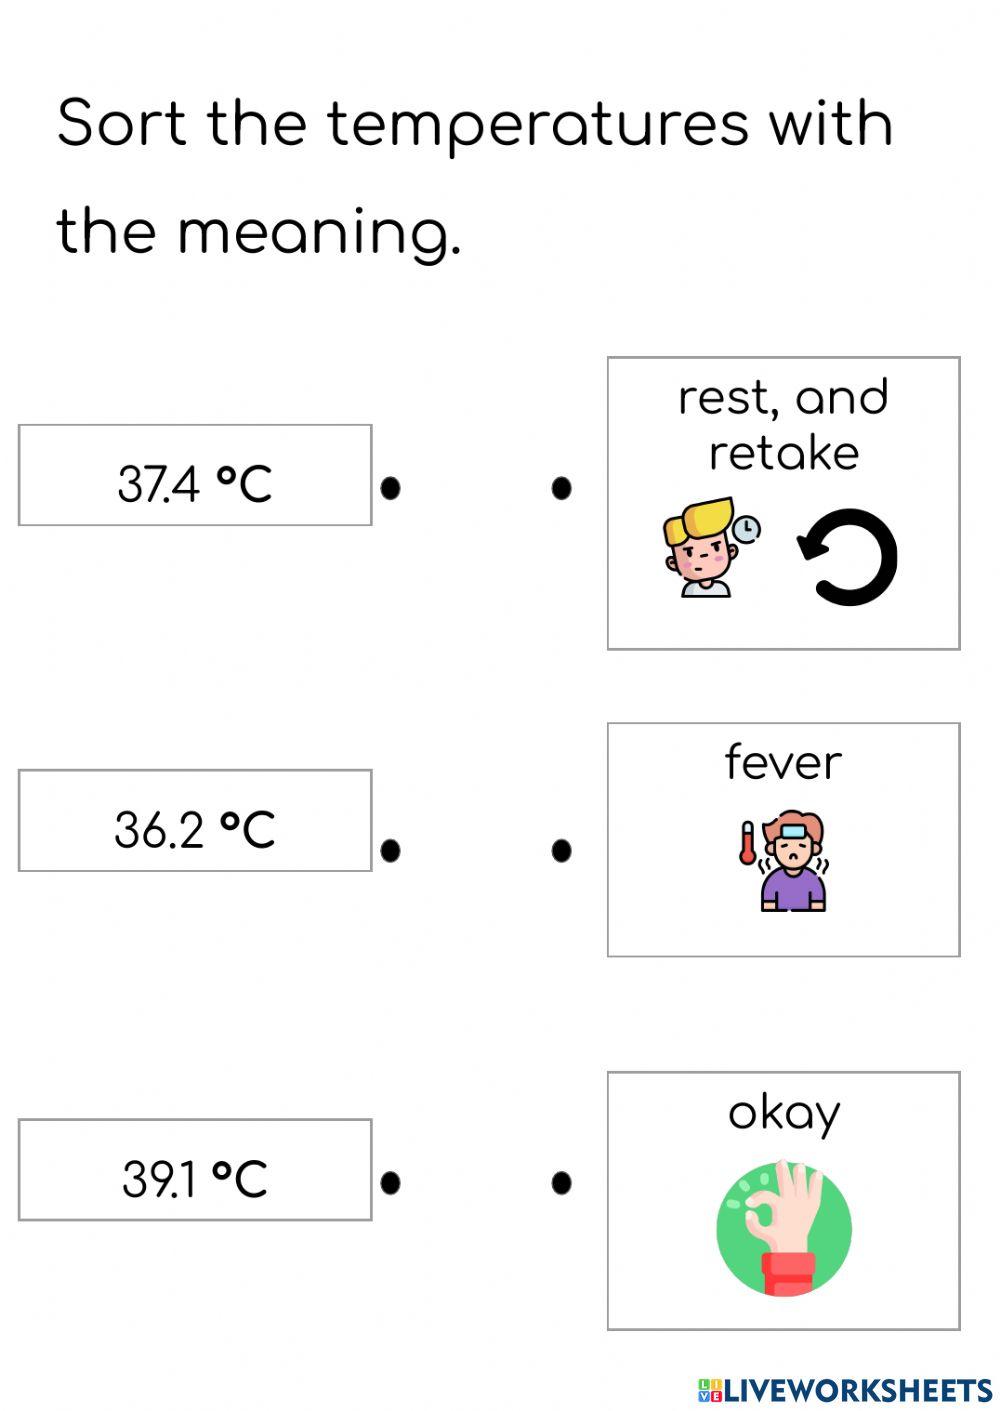 Thermometer and Weighing Scale recap